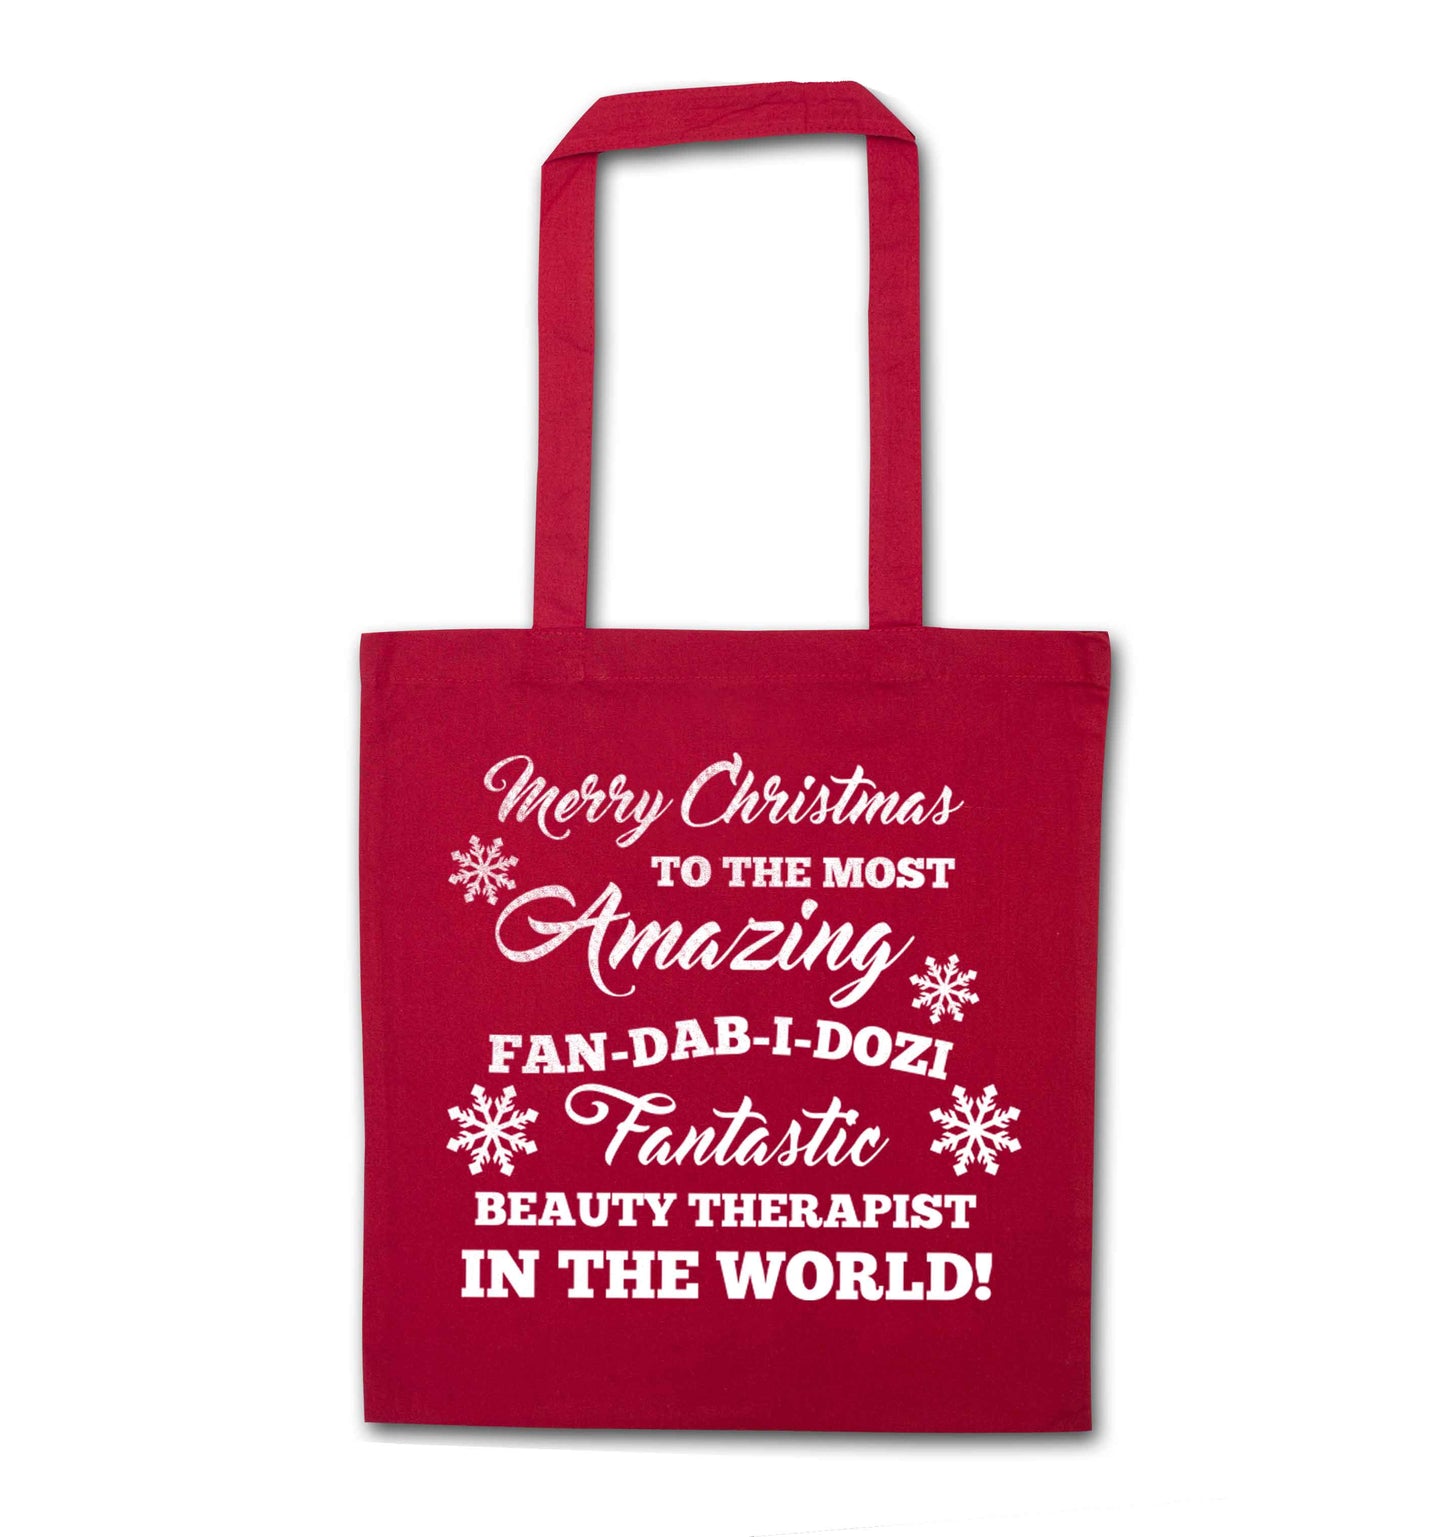 Merry Christmas to the most amazing fan-dab-i-dozi fantasic beauty therapist in the world red tote bag